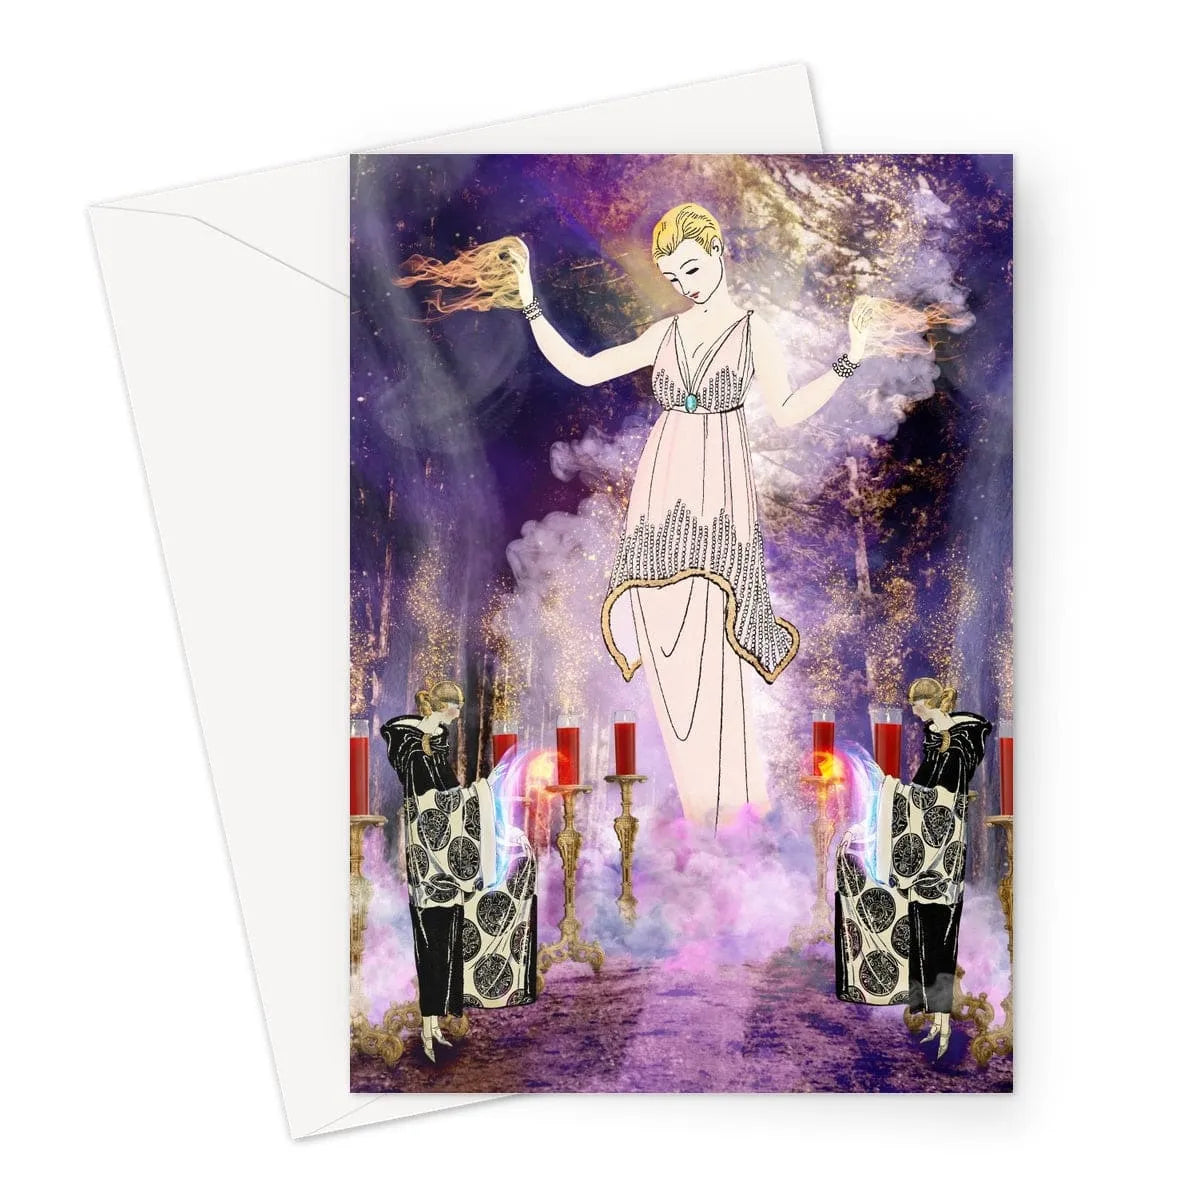 Aphromighty The 50ft Wiccan Greeting Card - A5 Portrait / 1 x A5 Card - Greeting & Note Cards - Aesthetic Art